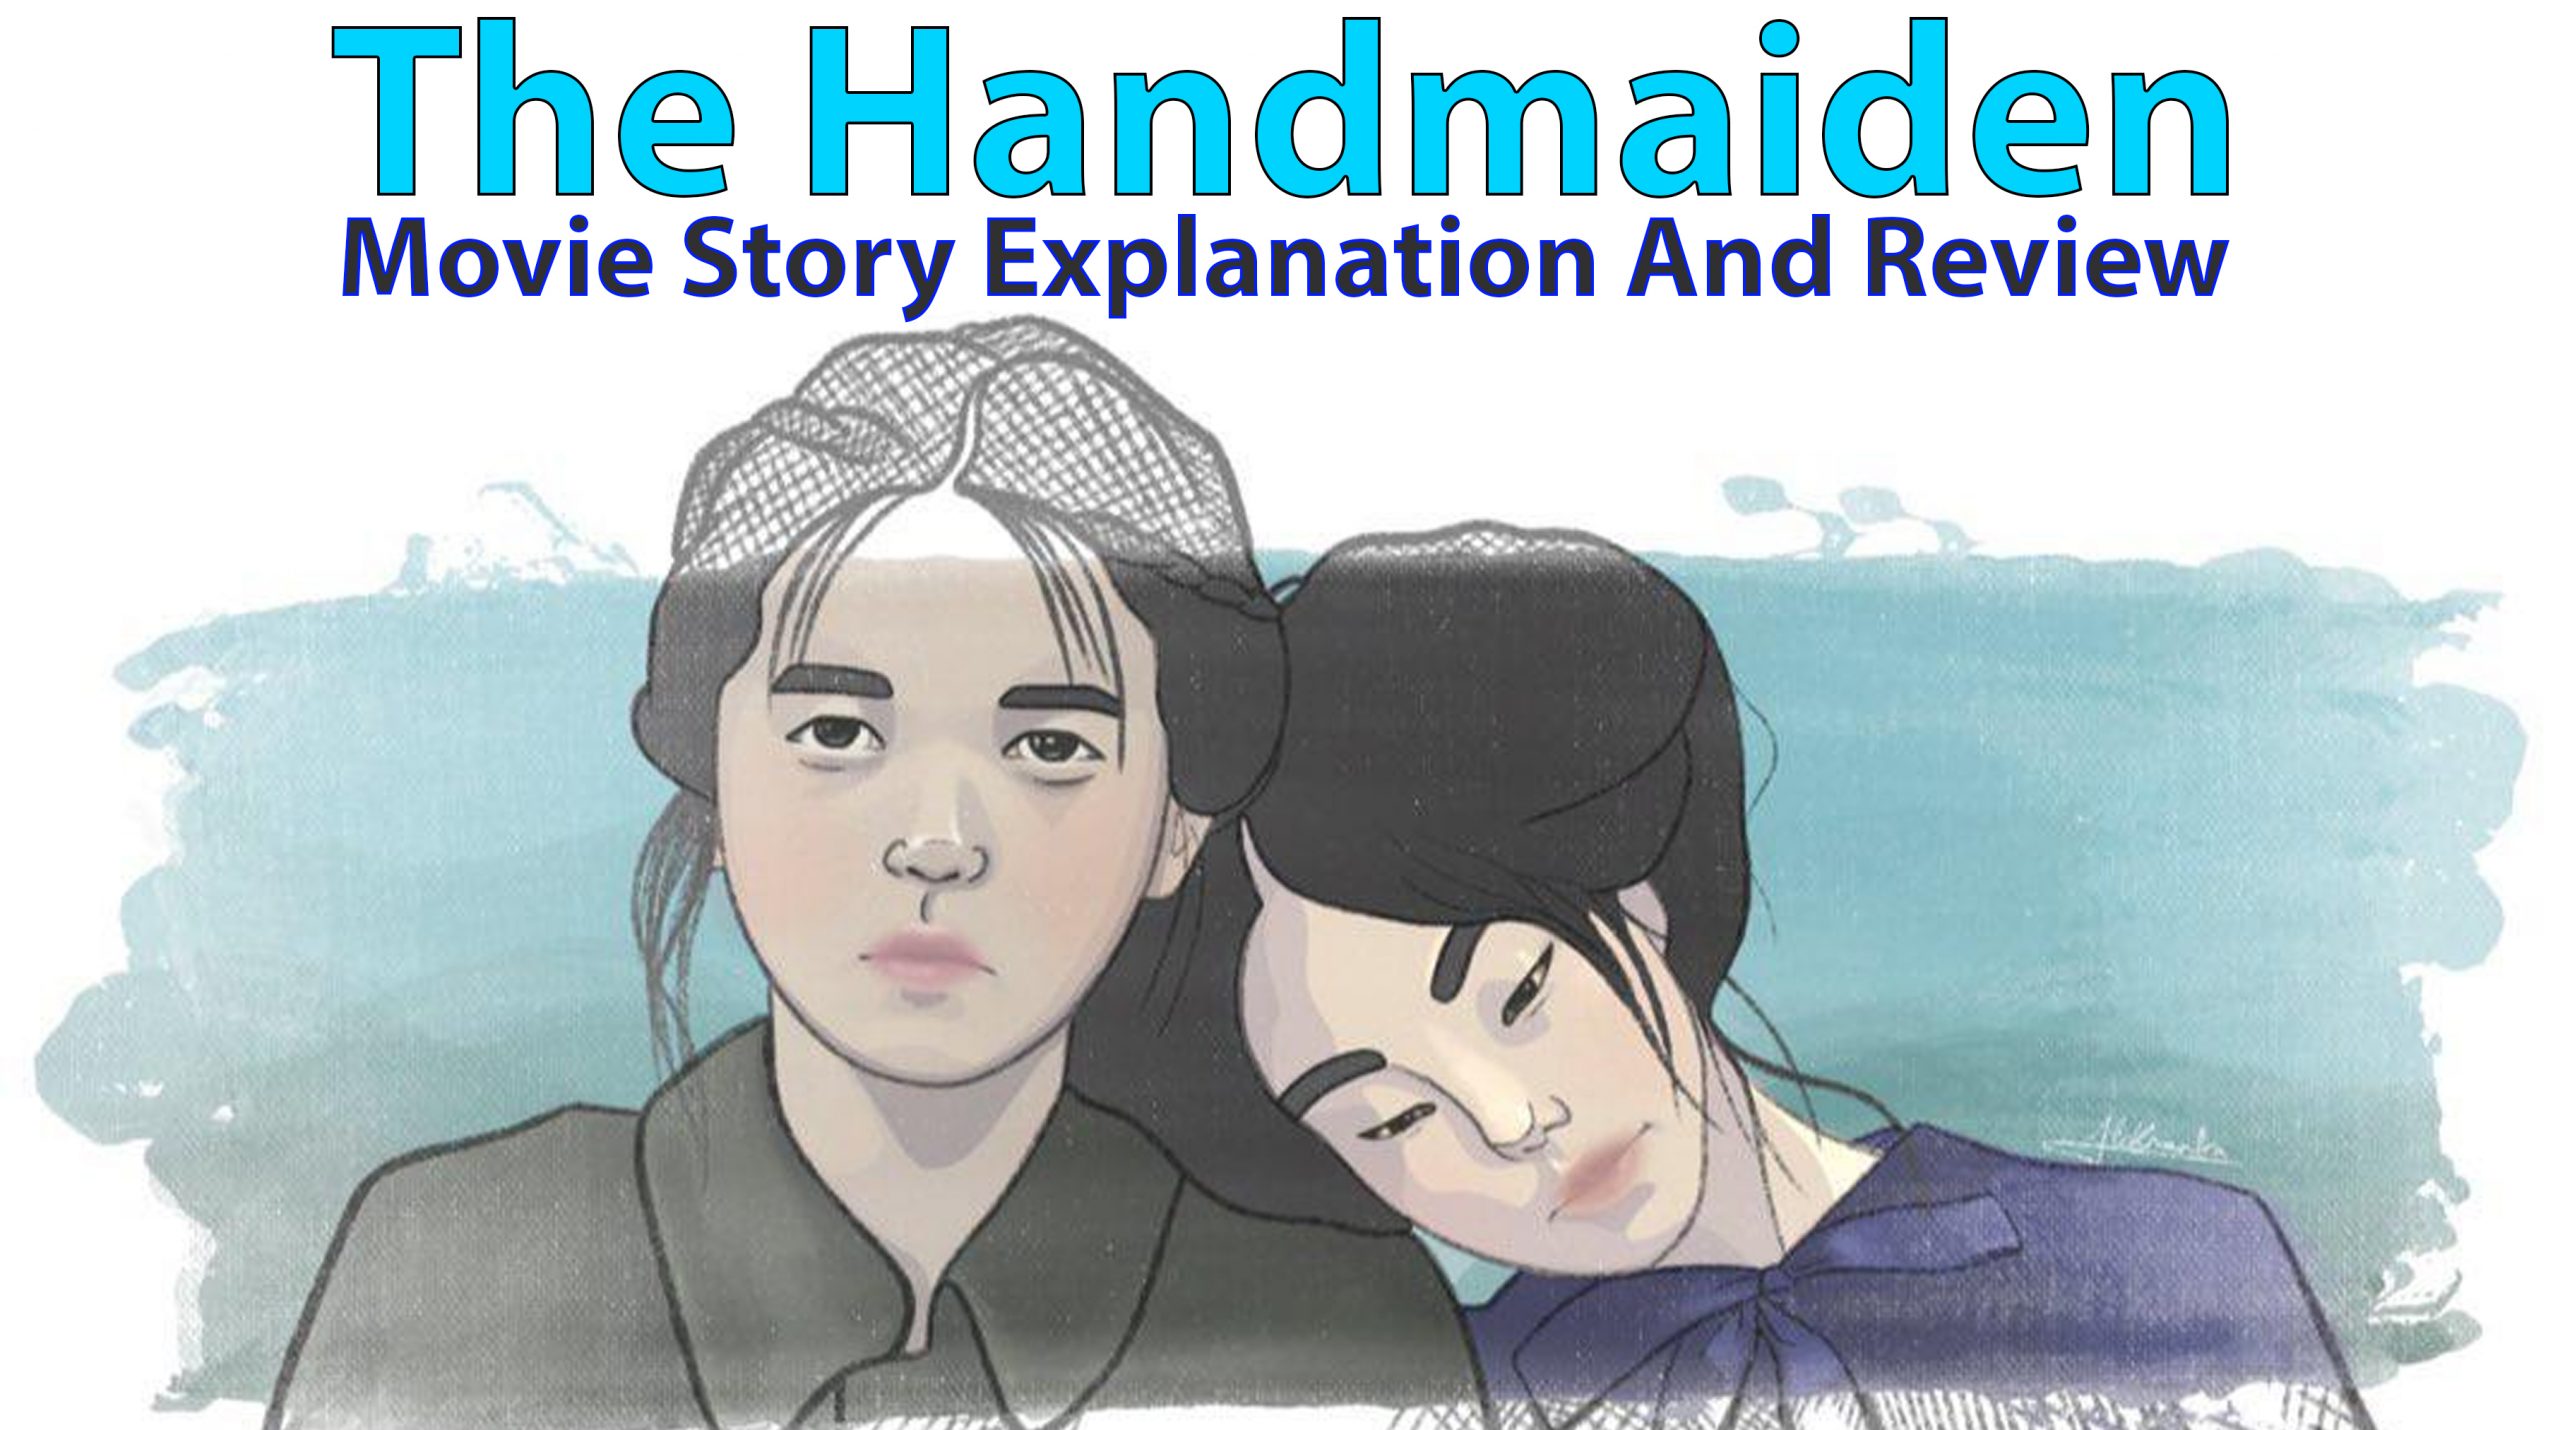 The Handmaiden Movie Story Explanation And Review